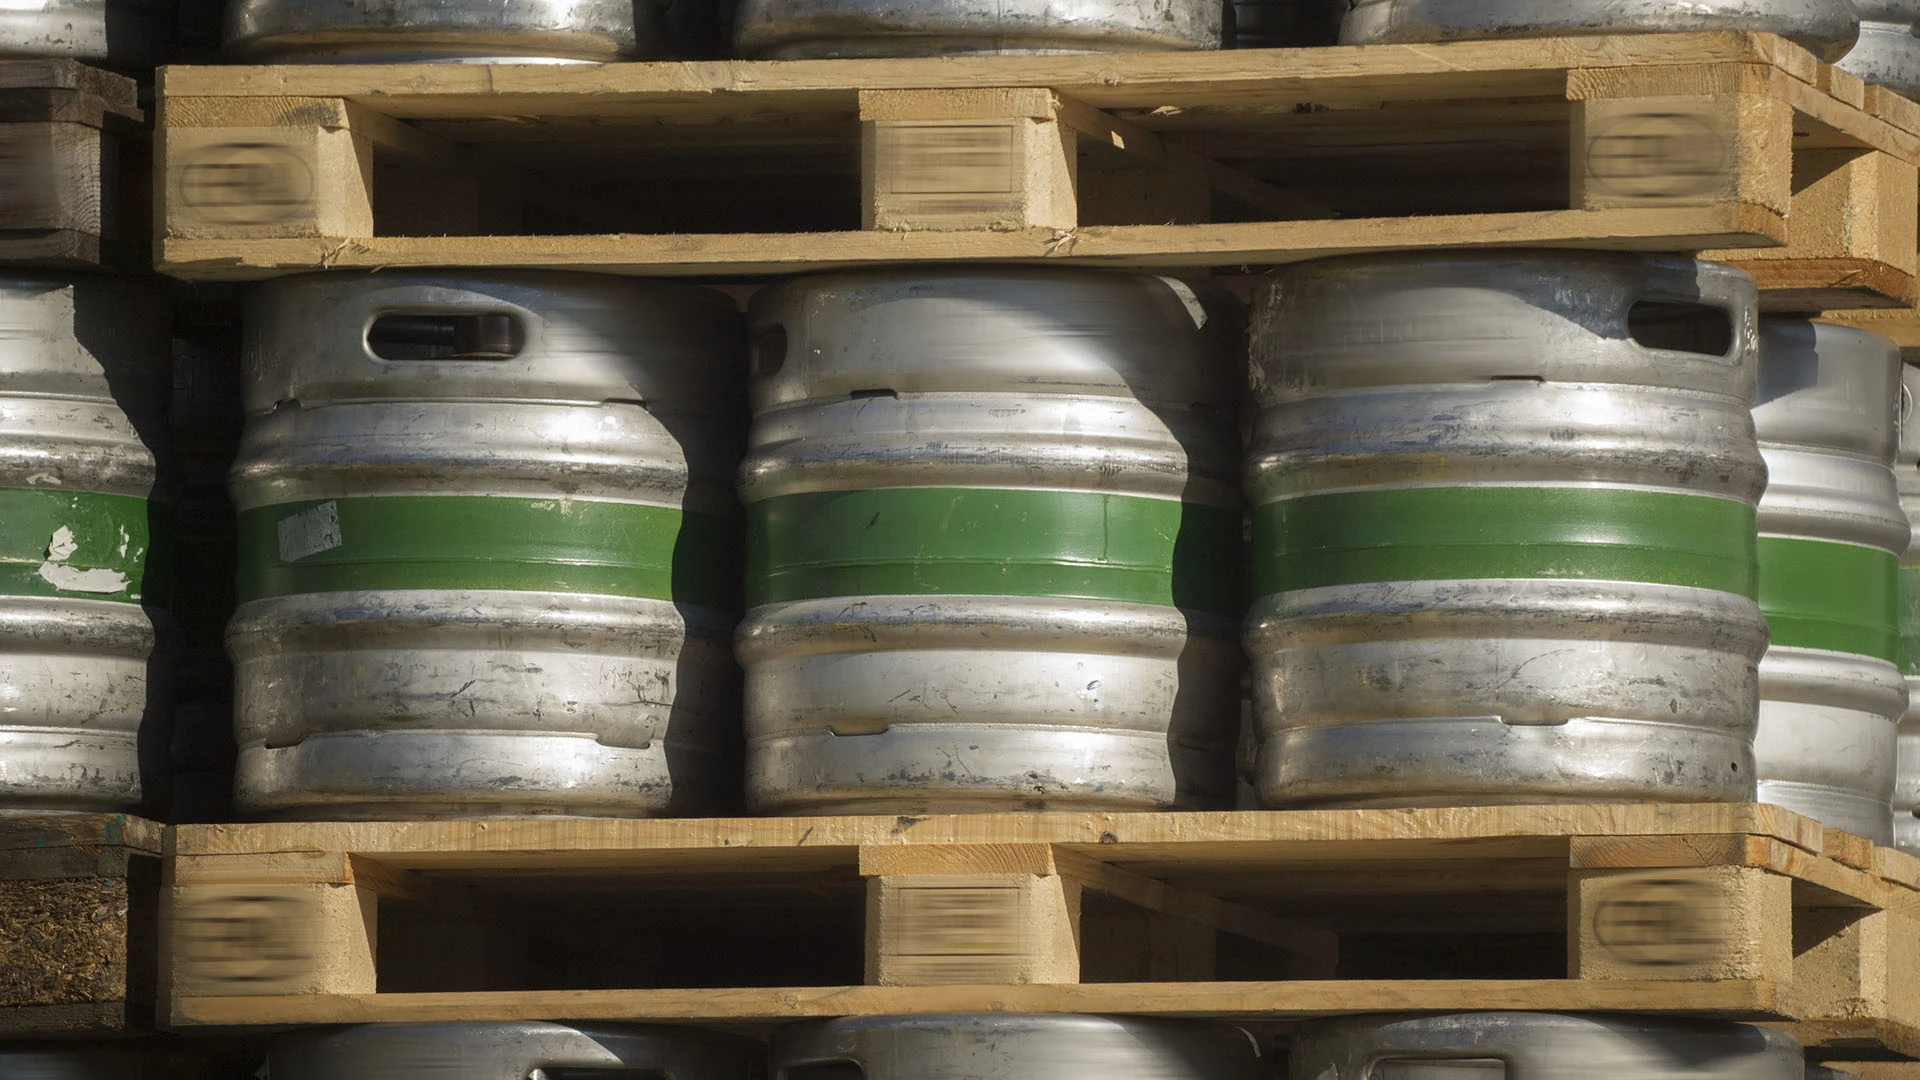 Kegs stacked on crates